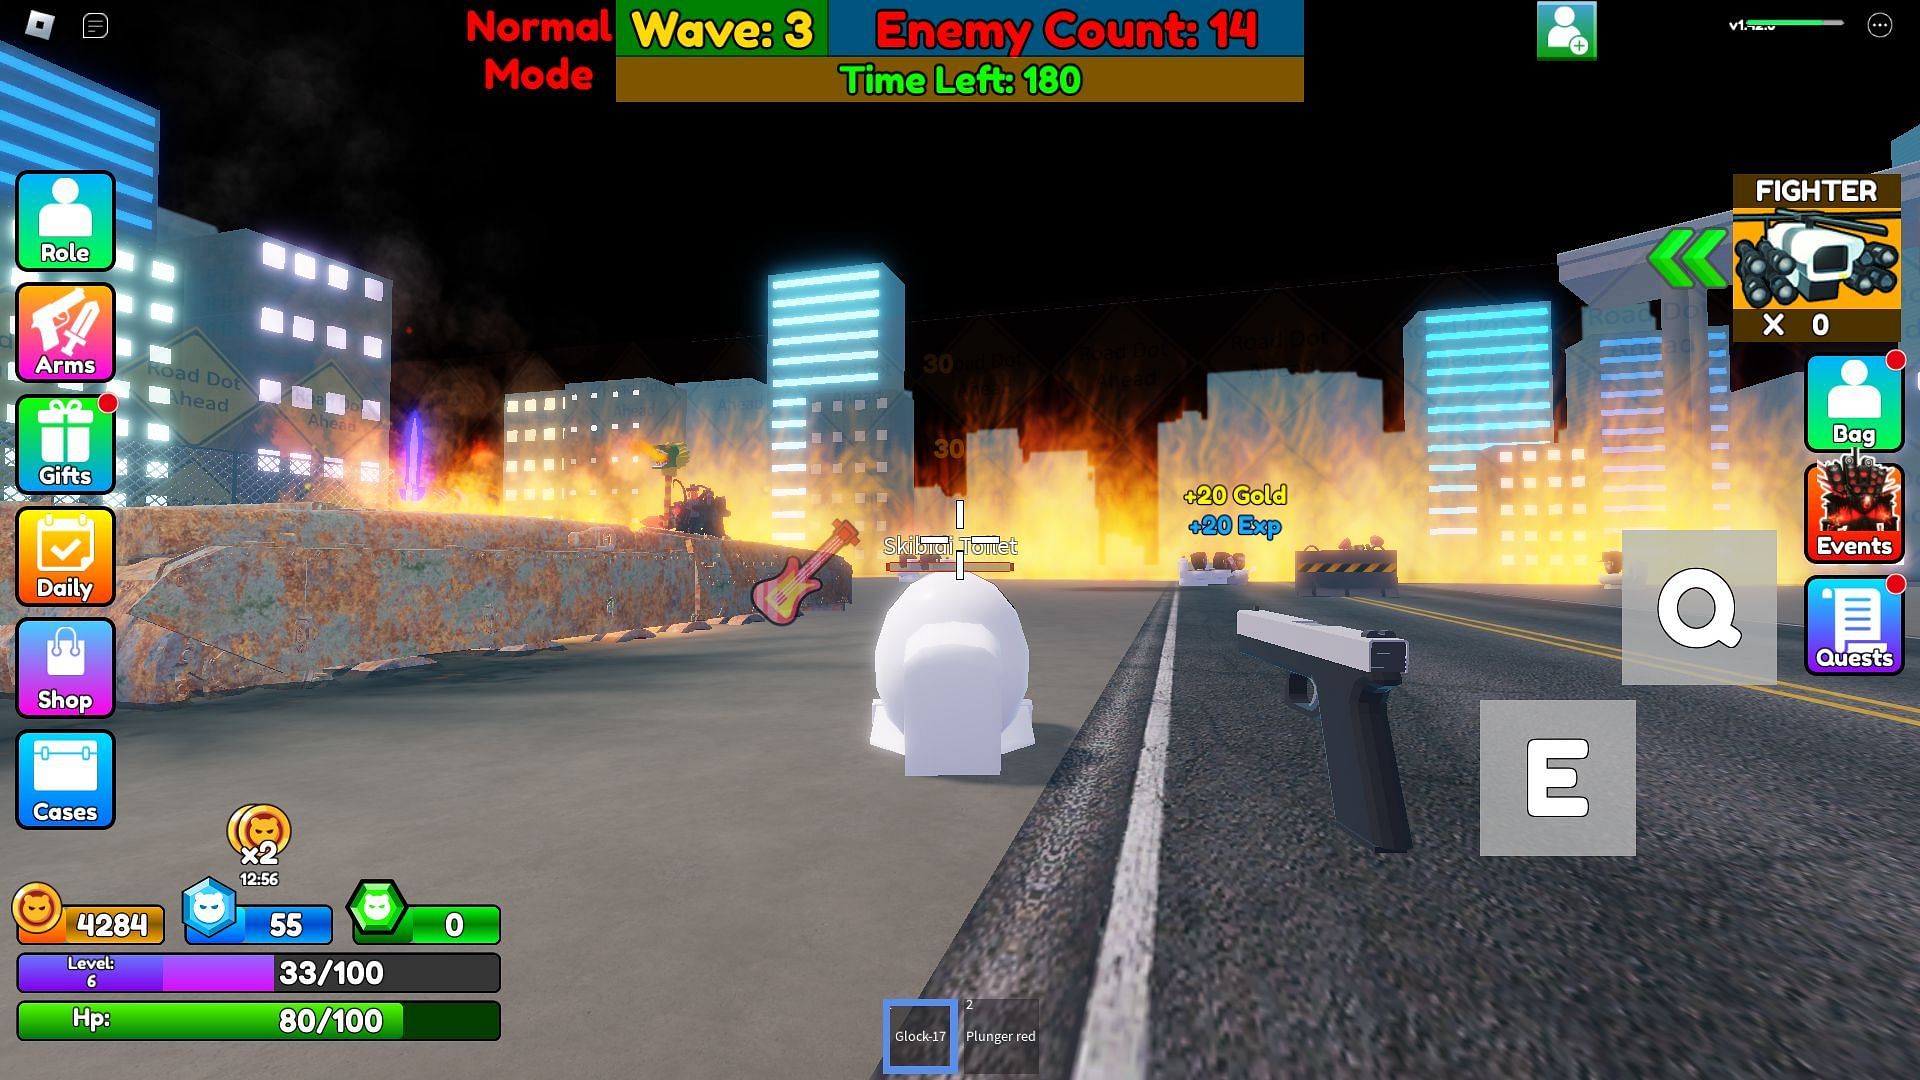 Normal mode gameplay (Image via Roblox)